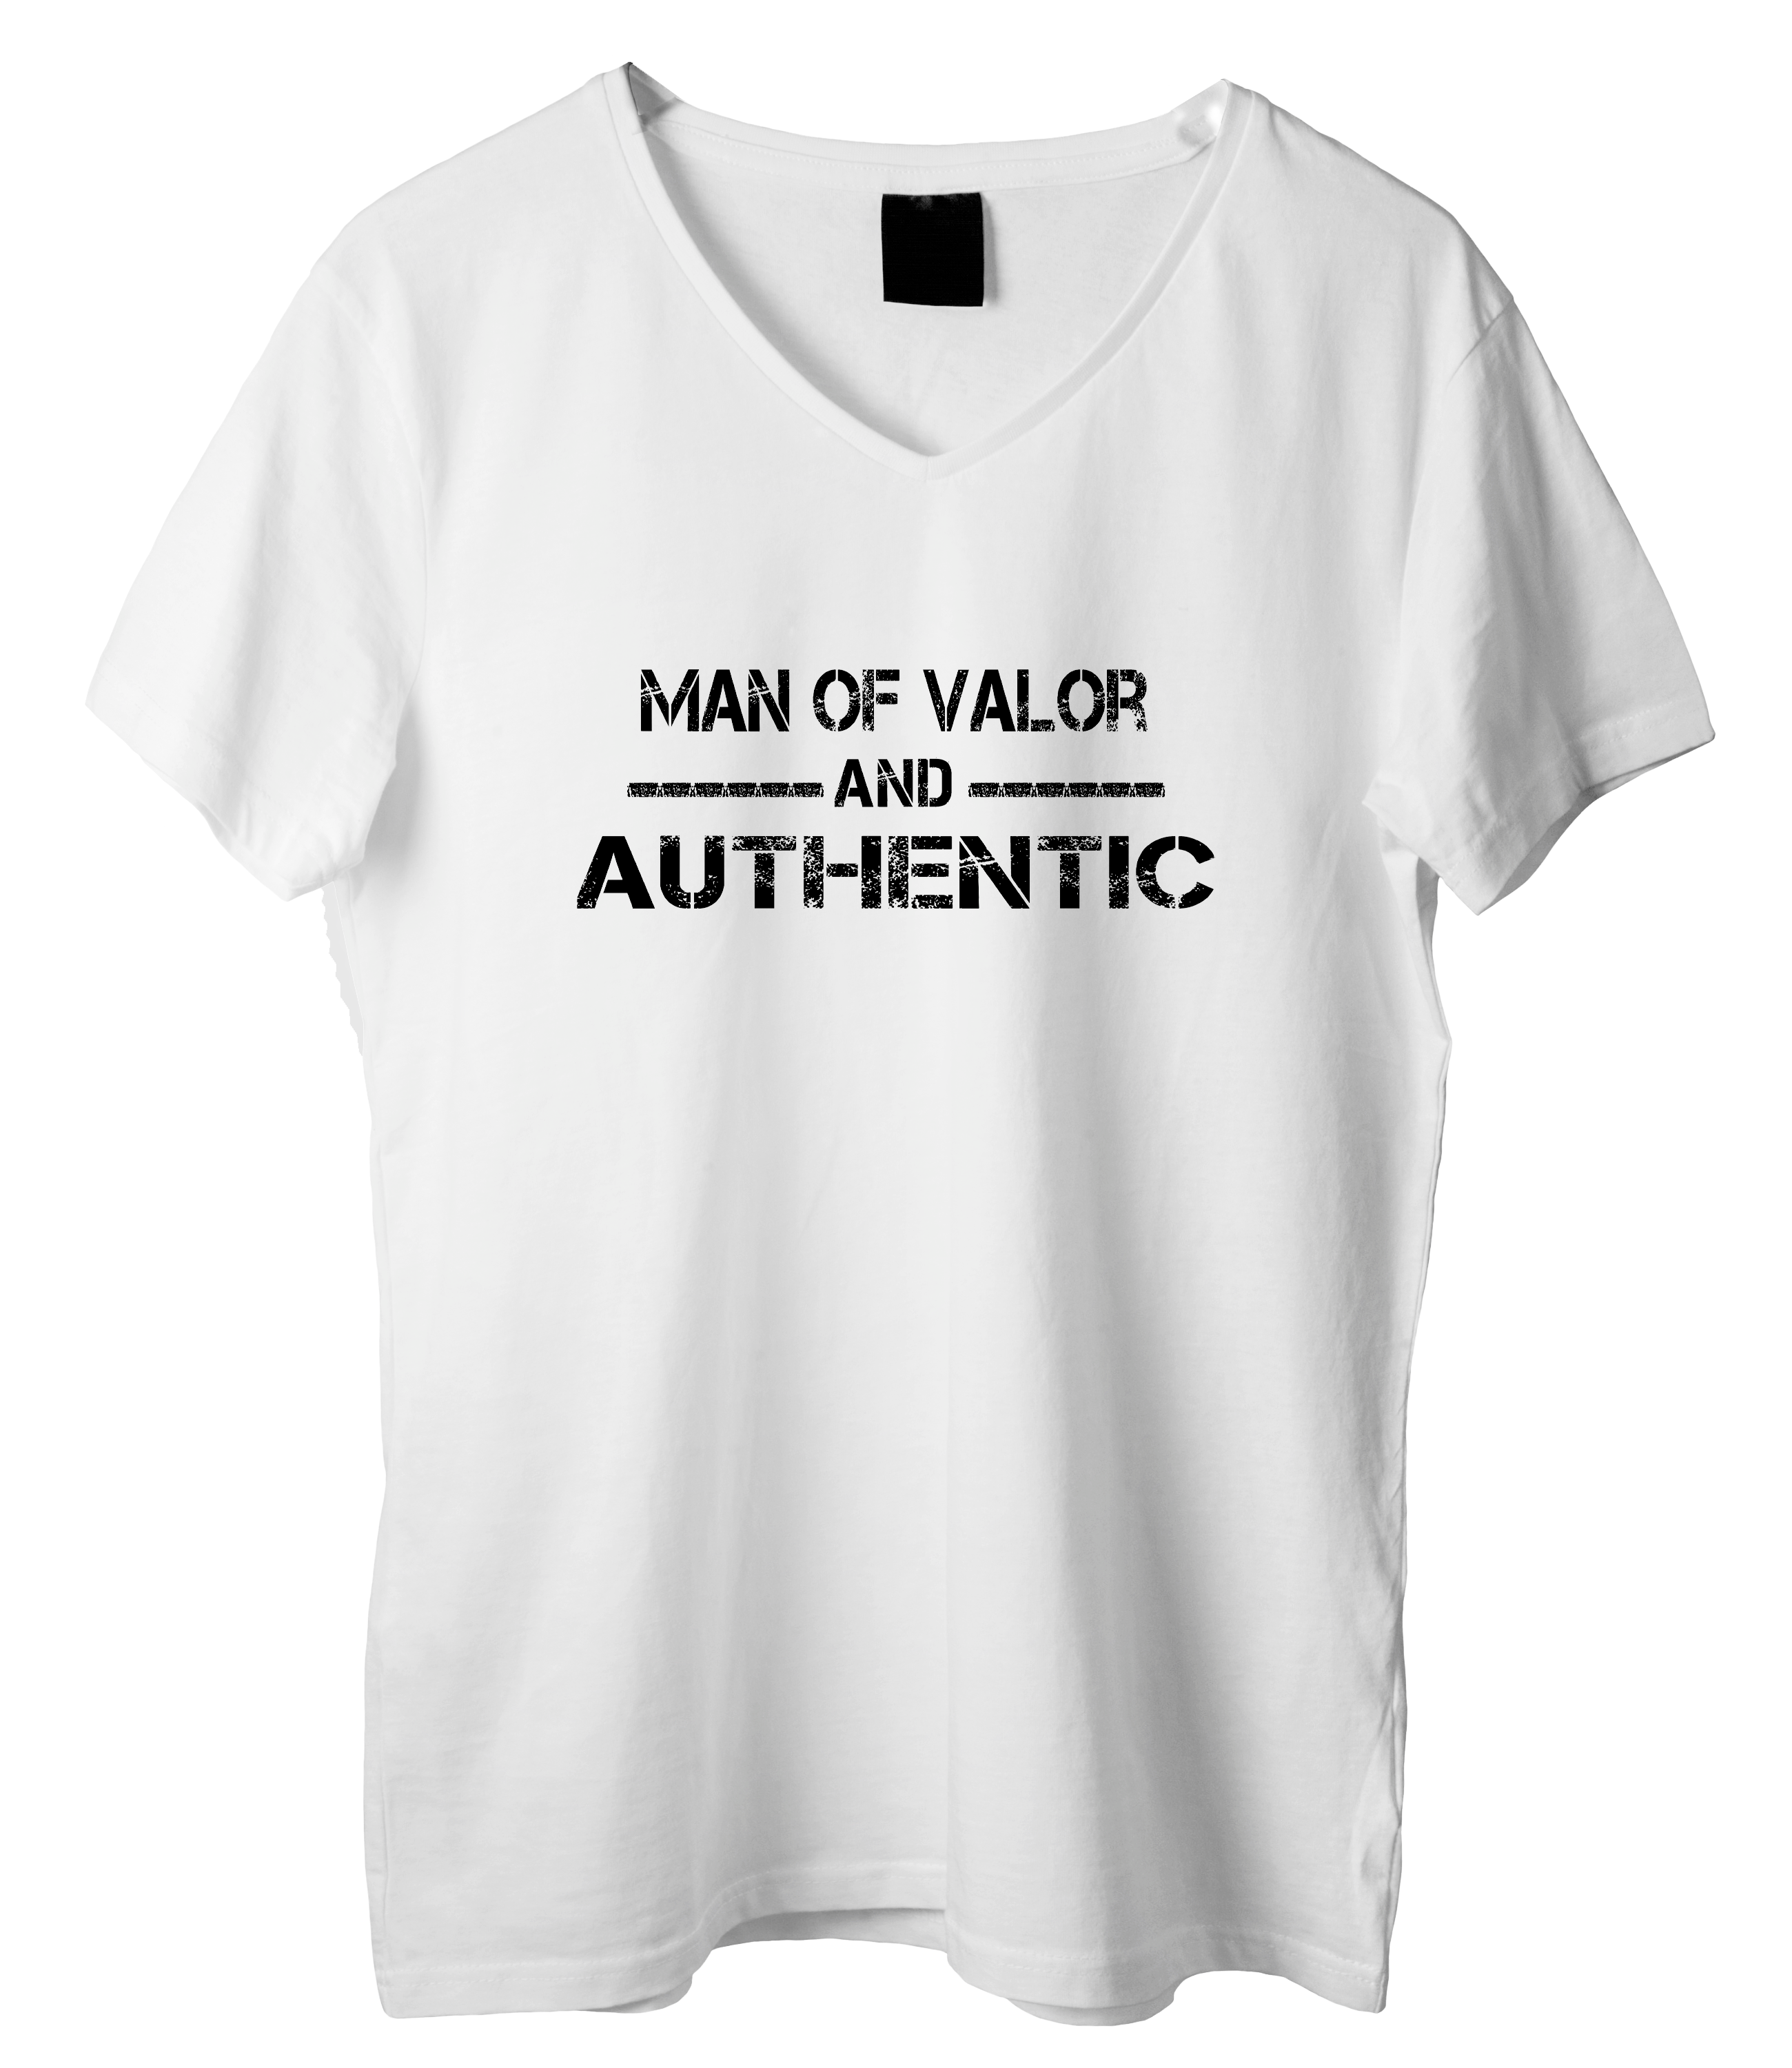 Men of Valor and Authentic Shirt